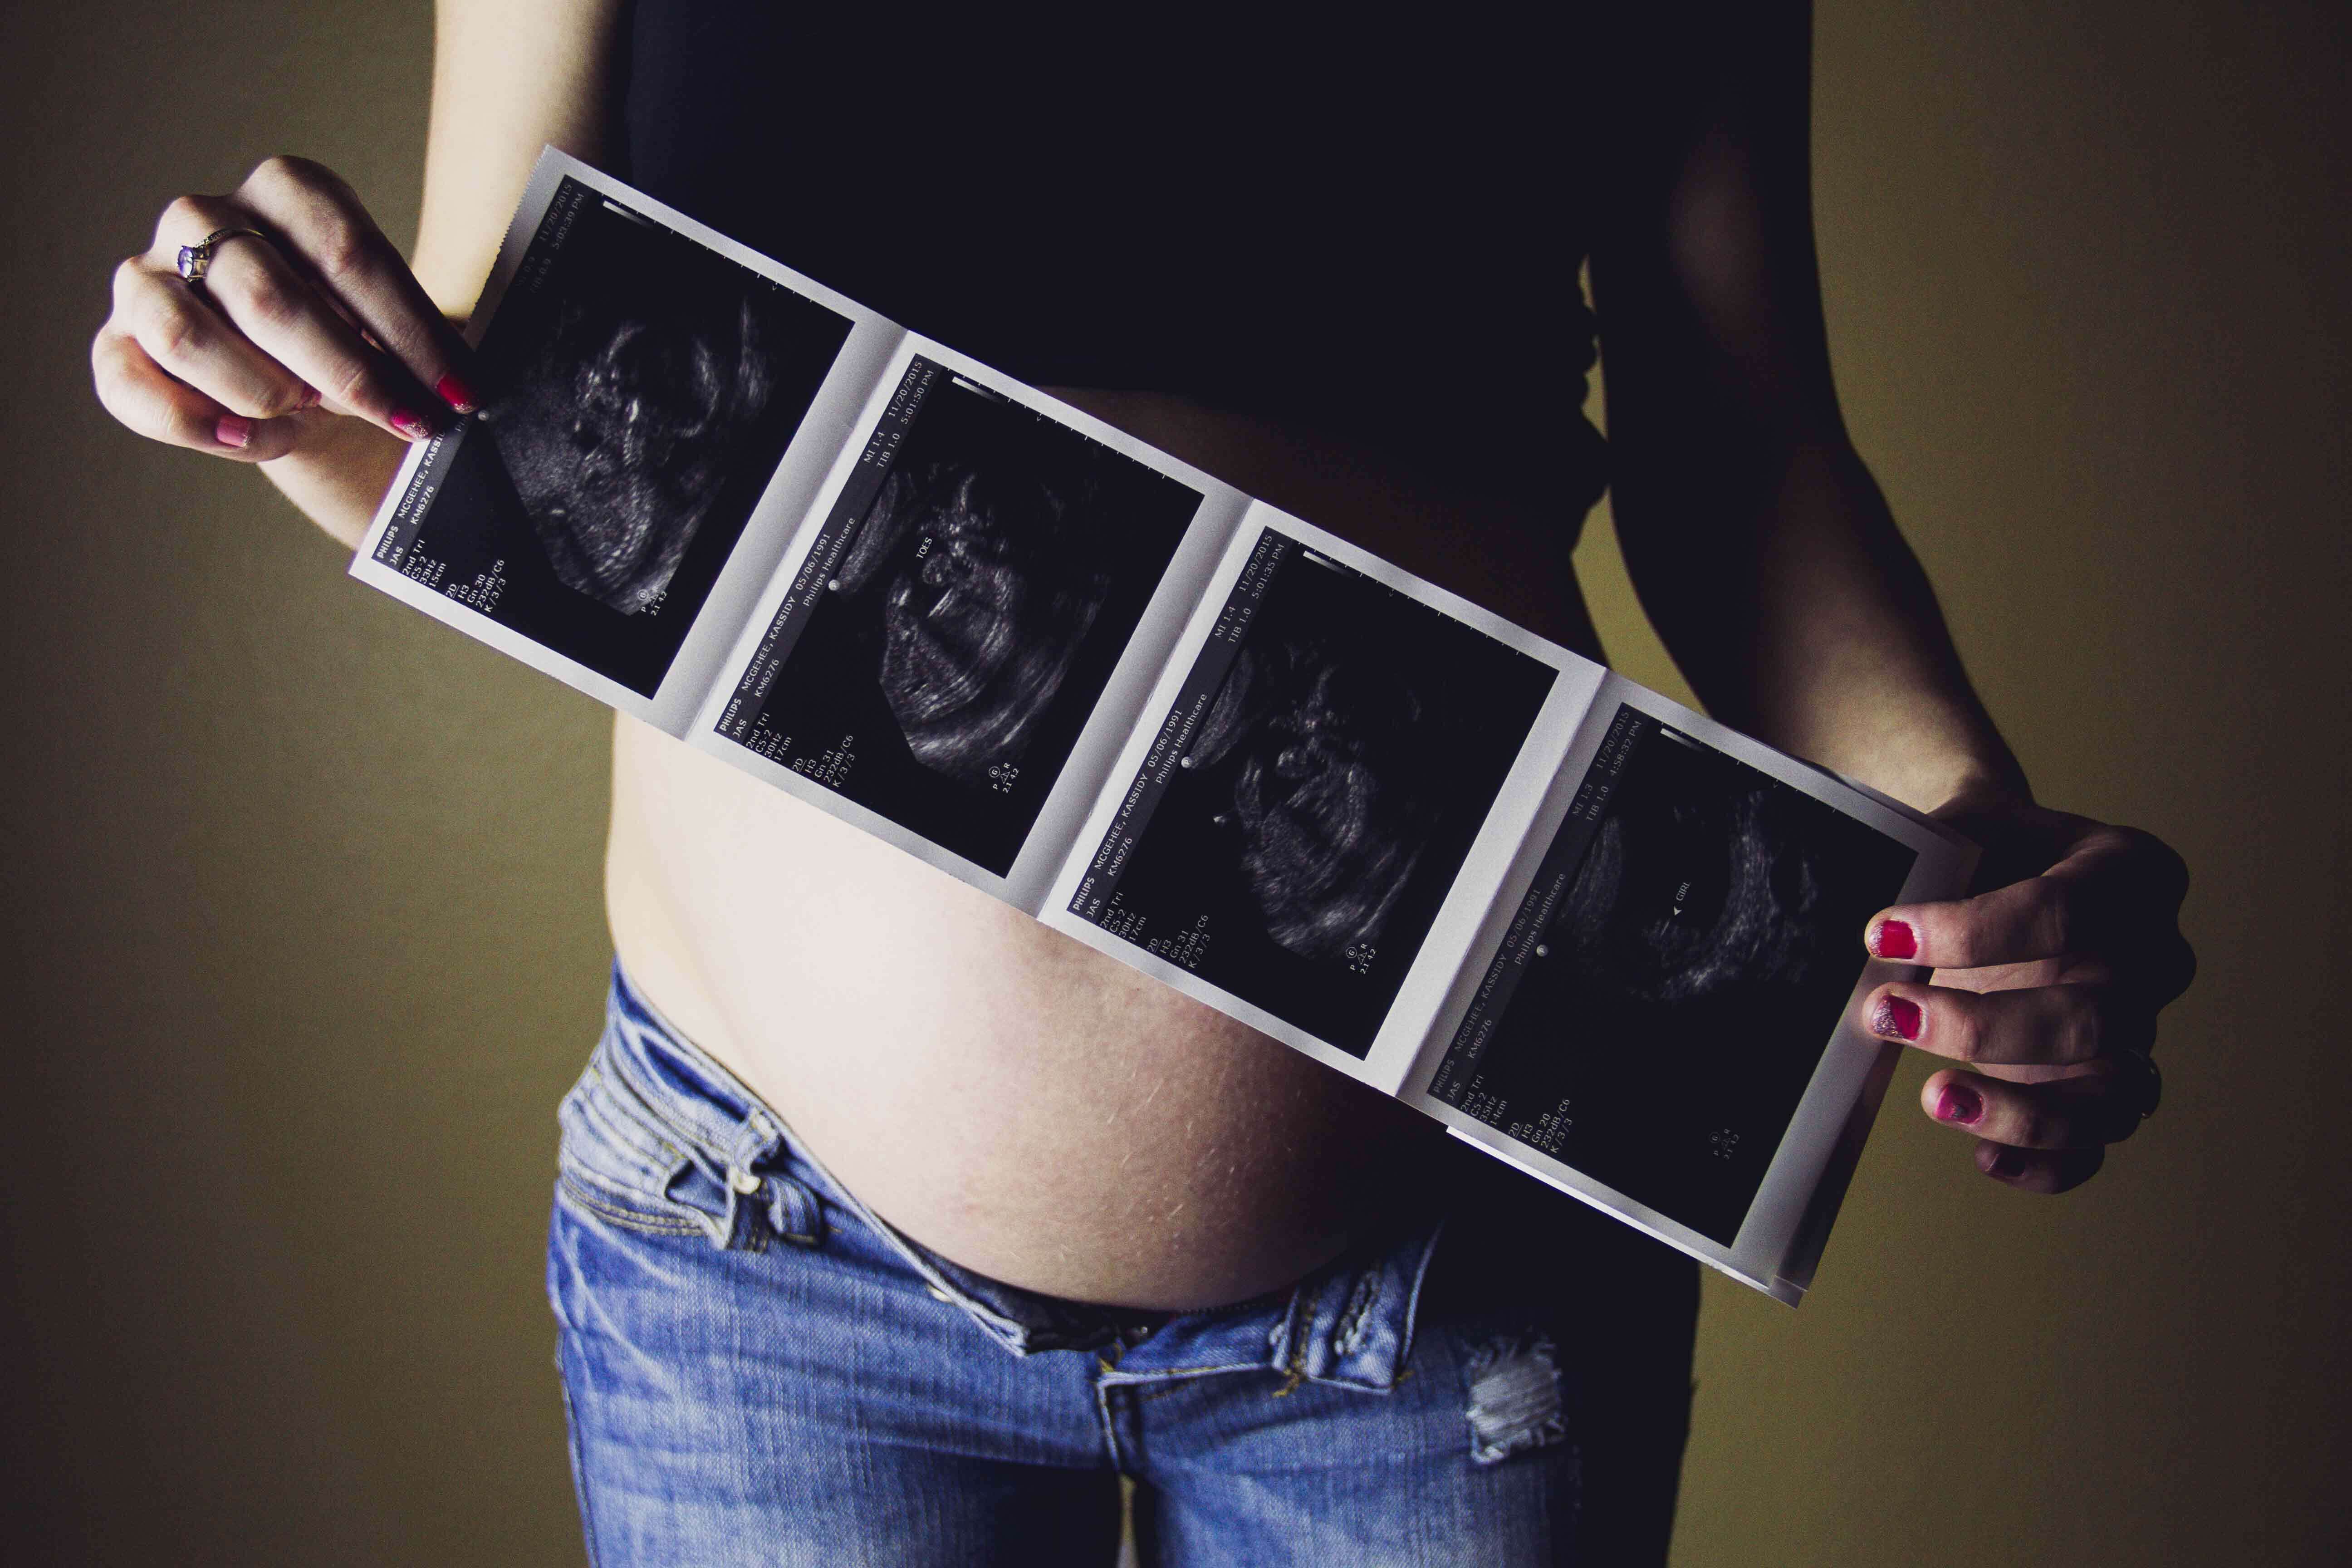 tests during pregnancy might include a sonogram